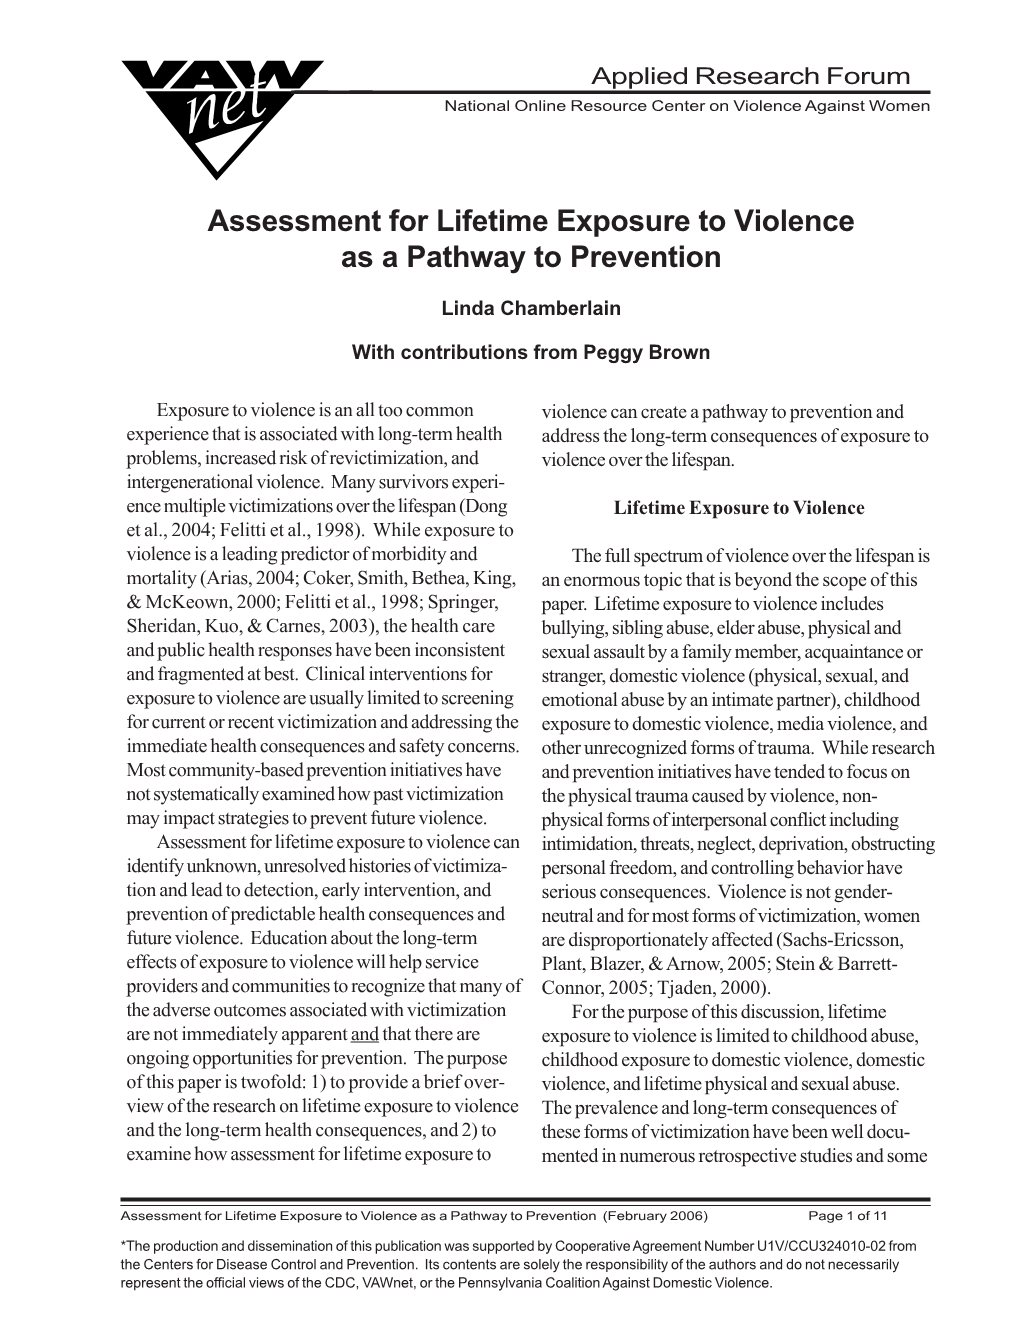 Assessment for Lifetime Exposure to Violence As a Pathway to Prevention